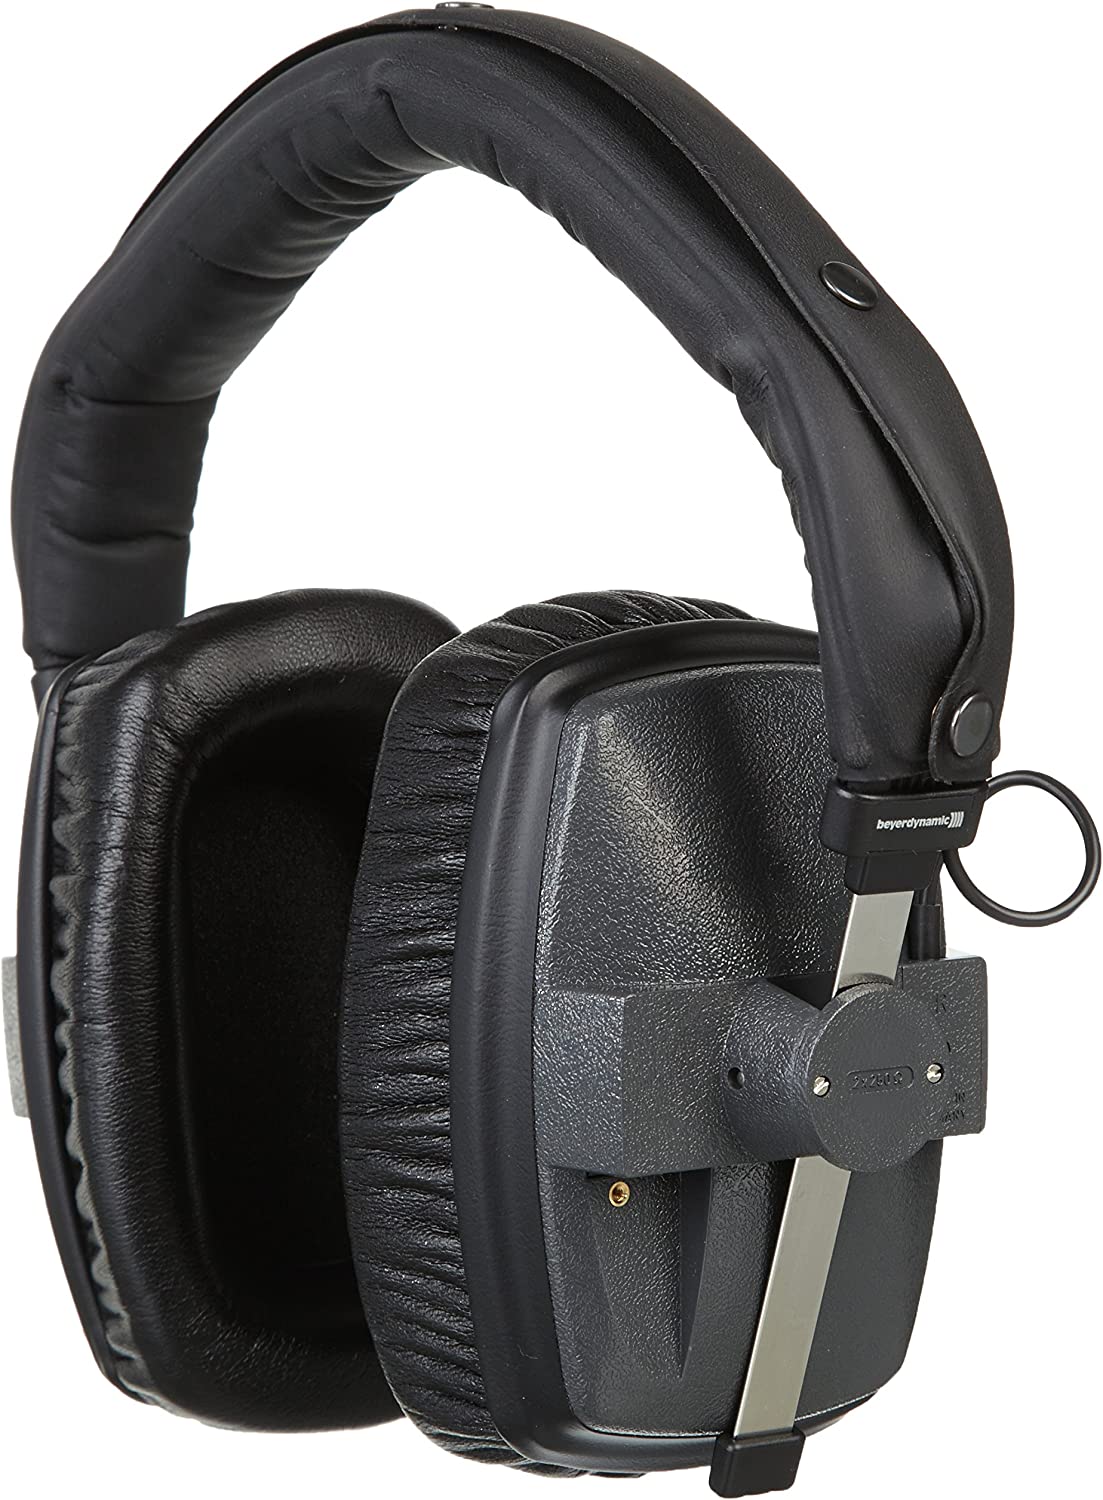 beyerdynamic DT 900 Pro X Open-Back Studio Headphones Bundle with  Detachable Cable, Headphone Splitter, Extension Cable, and 6AVE Headphone  Cleaning